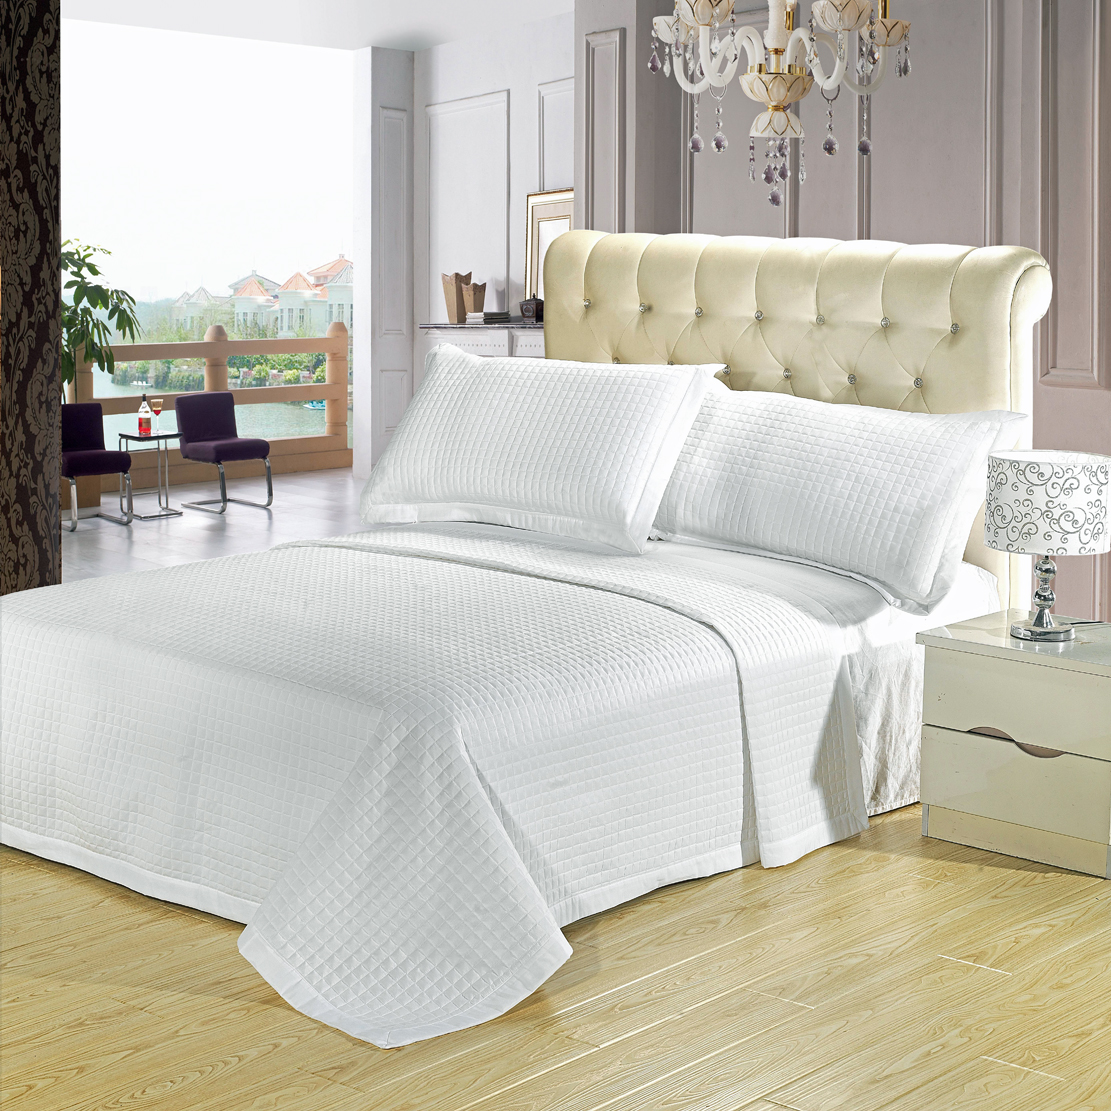 GoLinens Luxury White Checkered Quilted Wrinkle Free Microfiber 3 Piece Coverlets Set - Twin - White